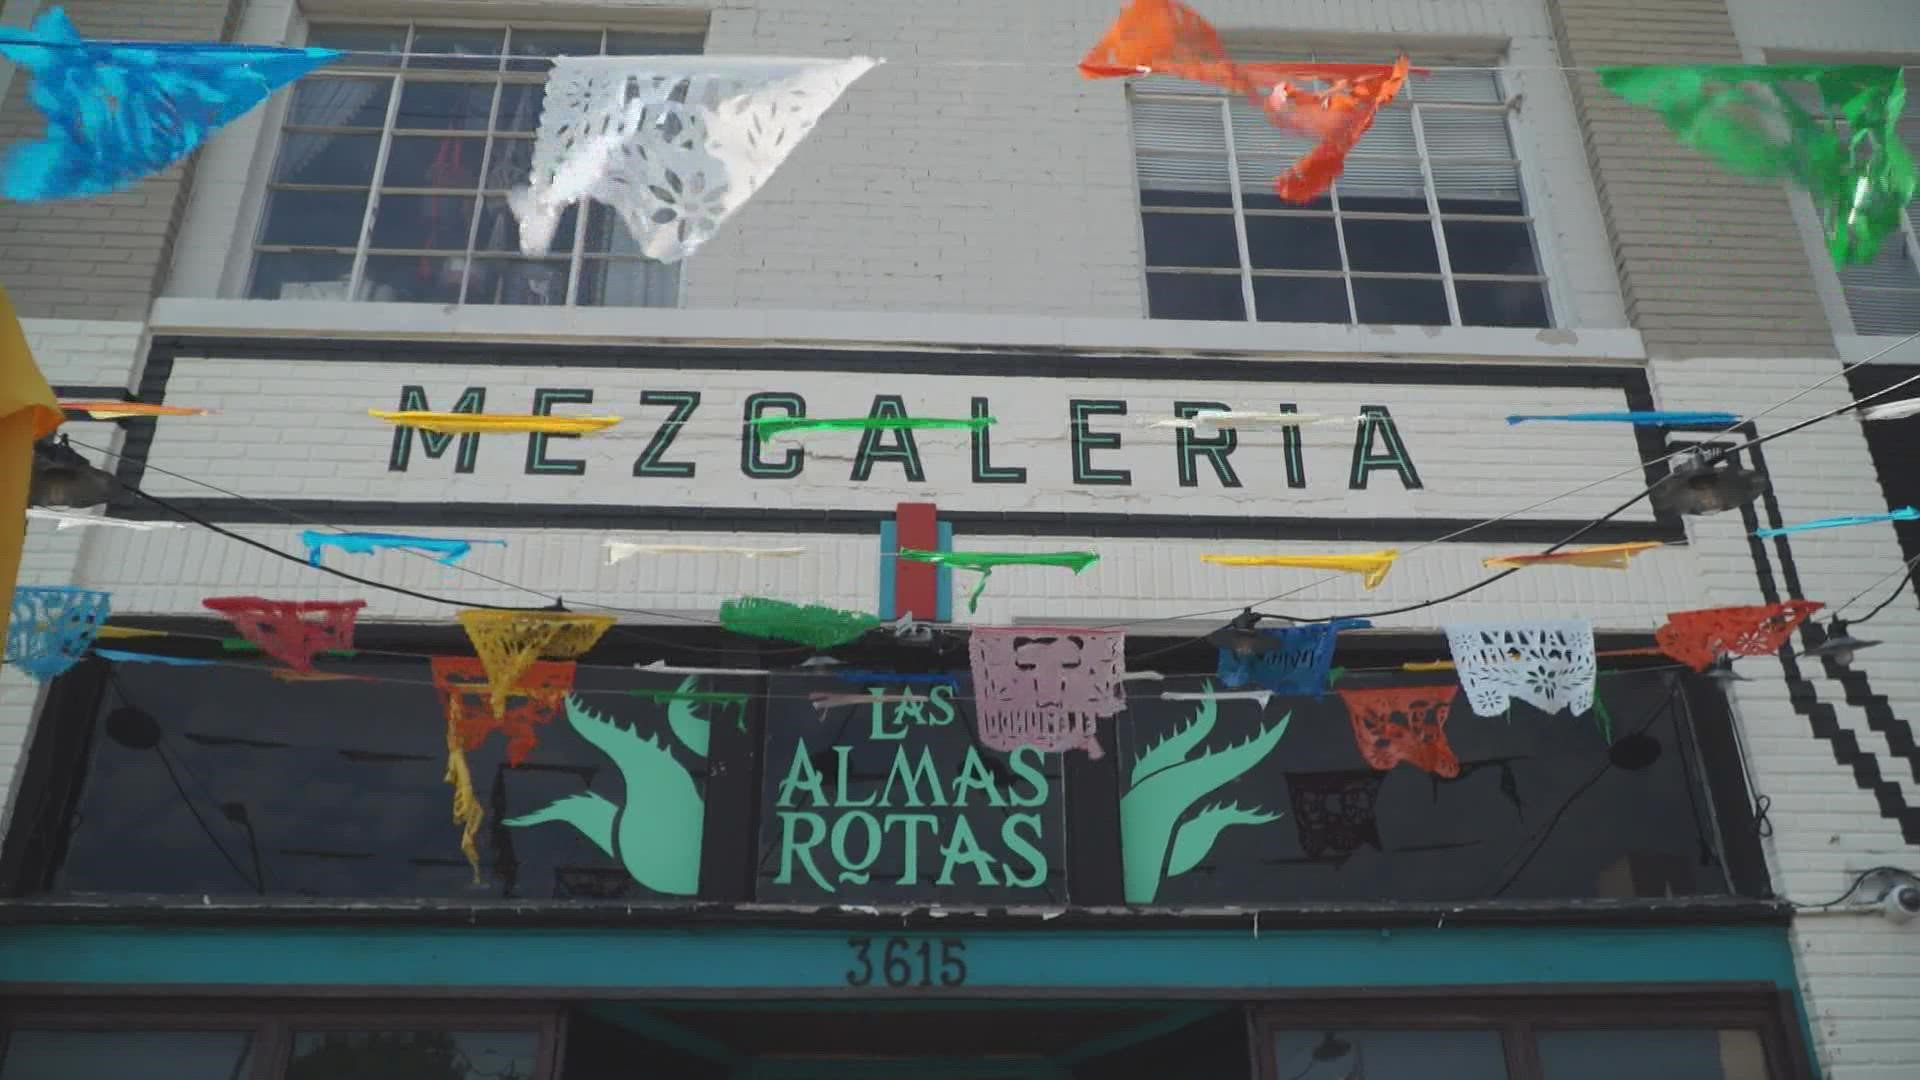 Across the street from Fair Park is a brightly decorated mezcalaria called Las Almas Rotas. The name translates to “broken souls” in Spanish.